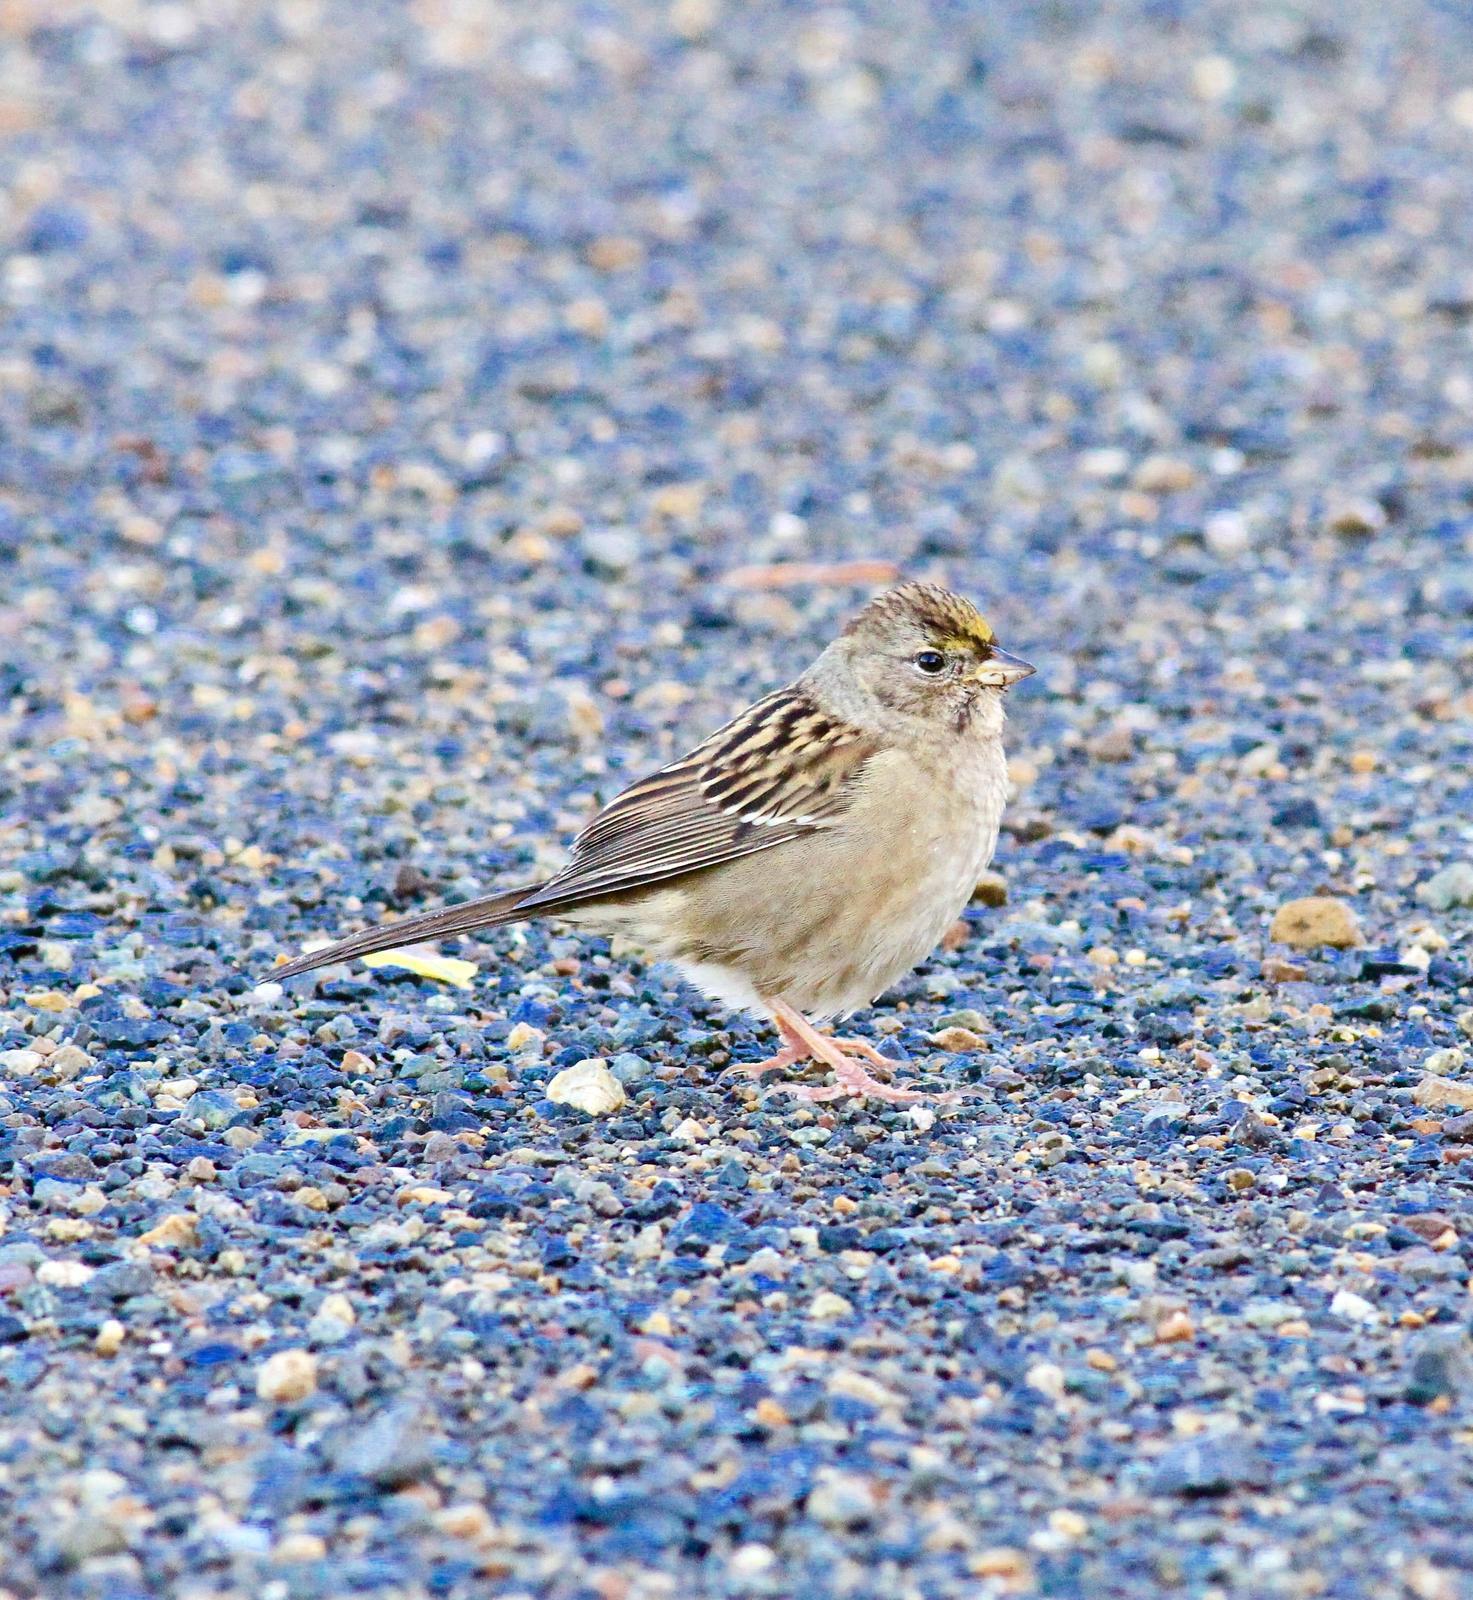 Golden-crowned Sparrow Photo by Kathryn Keith